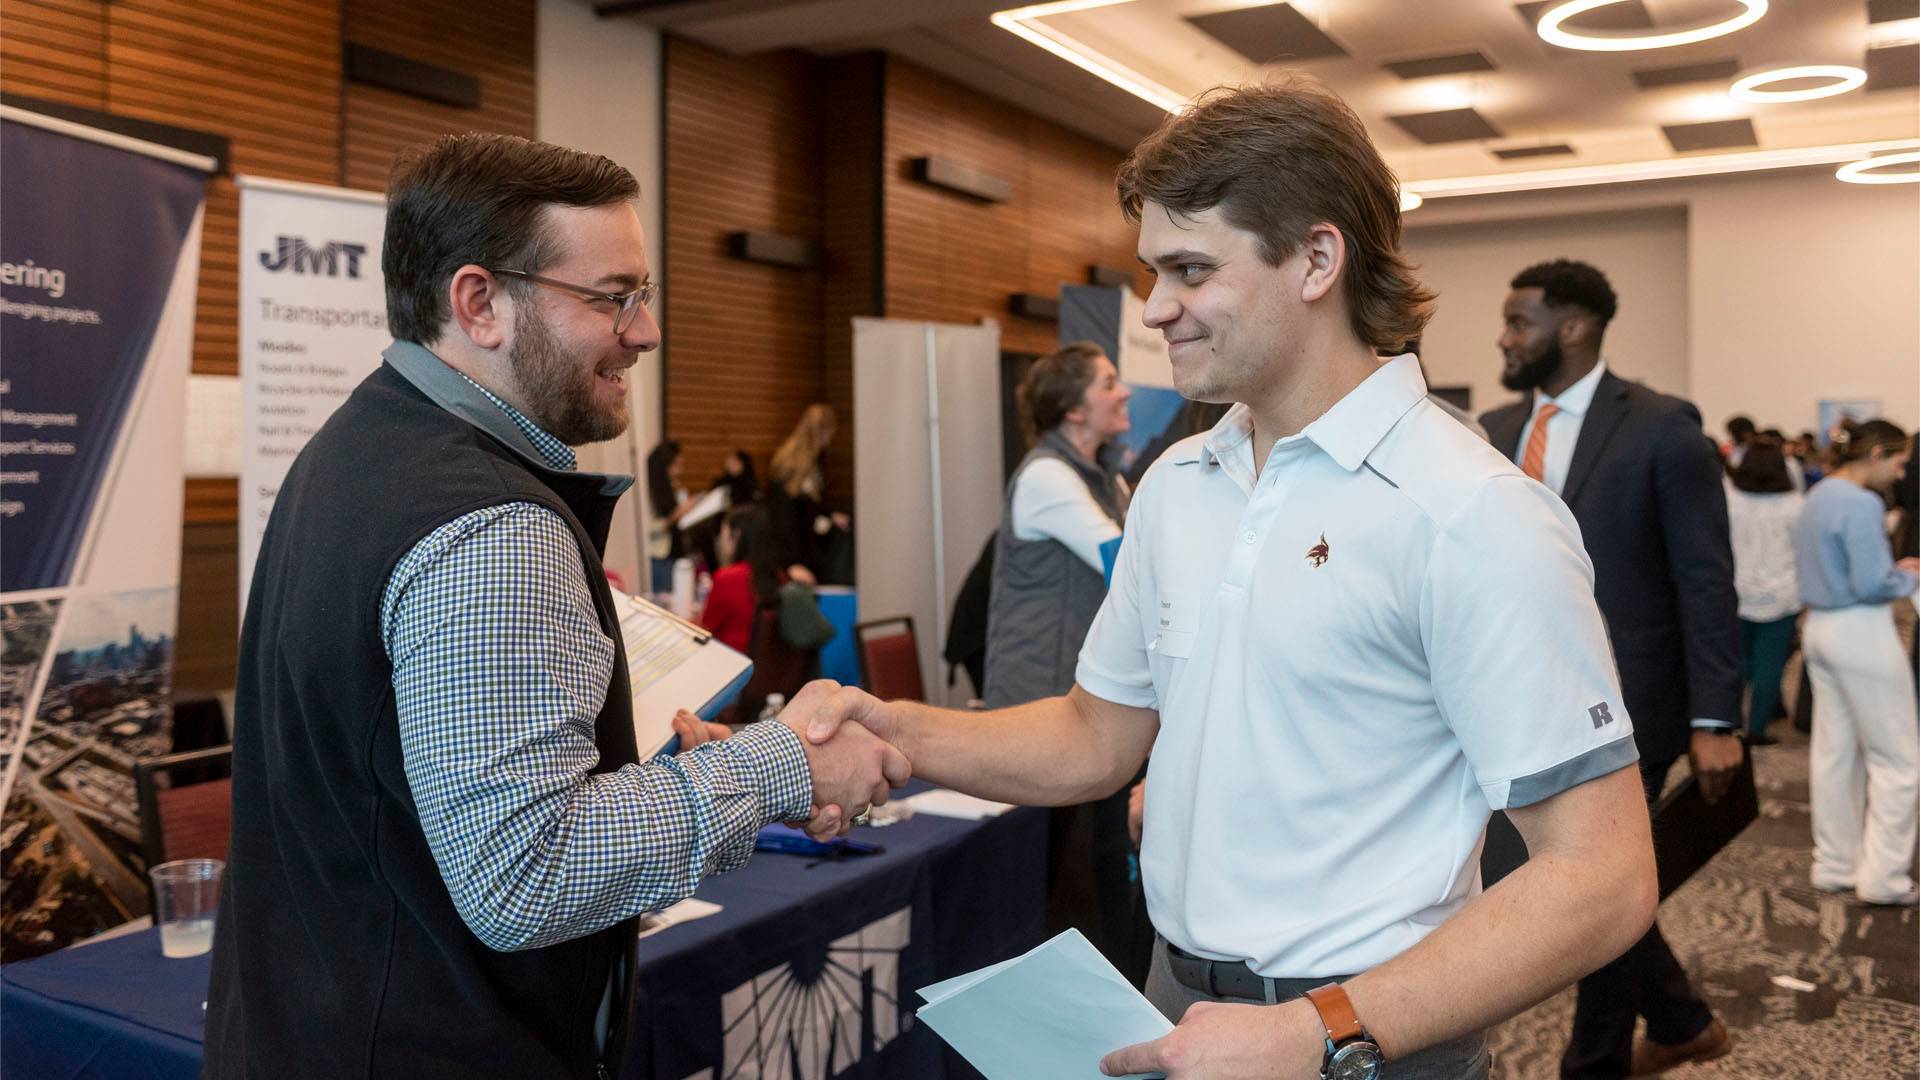 Two men shaking hands and smiling at a career fair.